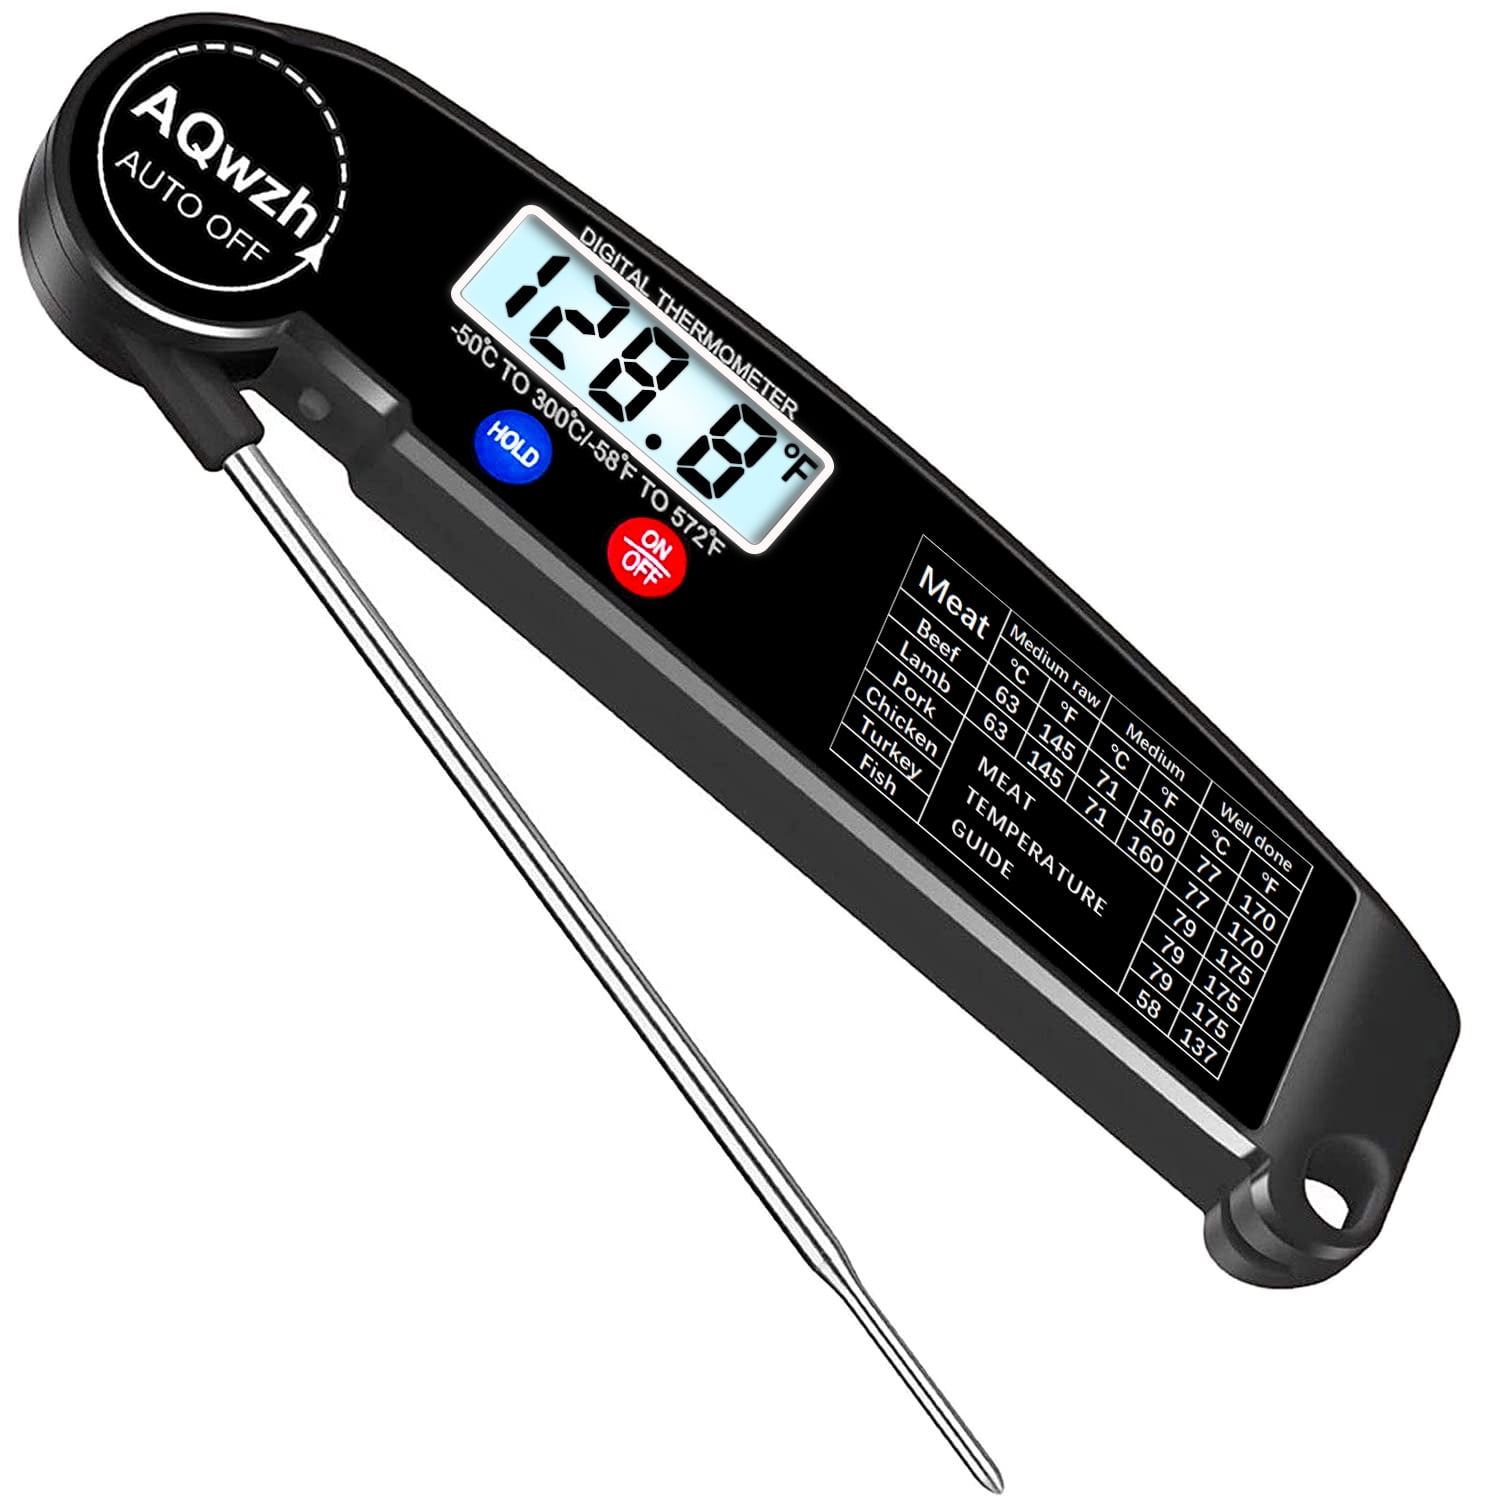 Aqwzh Pro TP06 Meat Thermometer, Instant Read Thermometer, Meat Thermometer, Food Thermometer, Candy Thermometer, for Kitchen BBQ Grill Smoker Meat